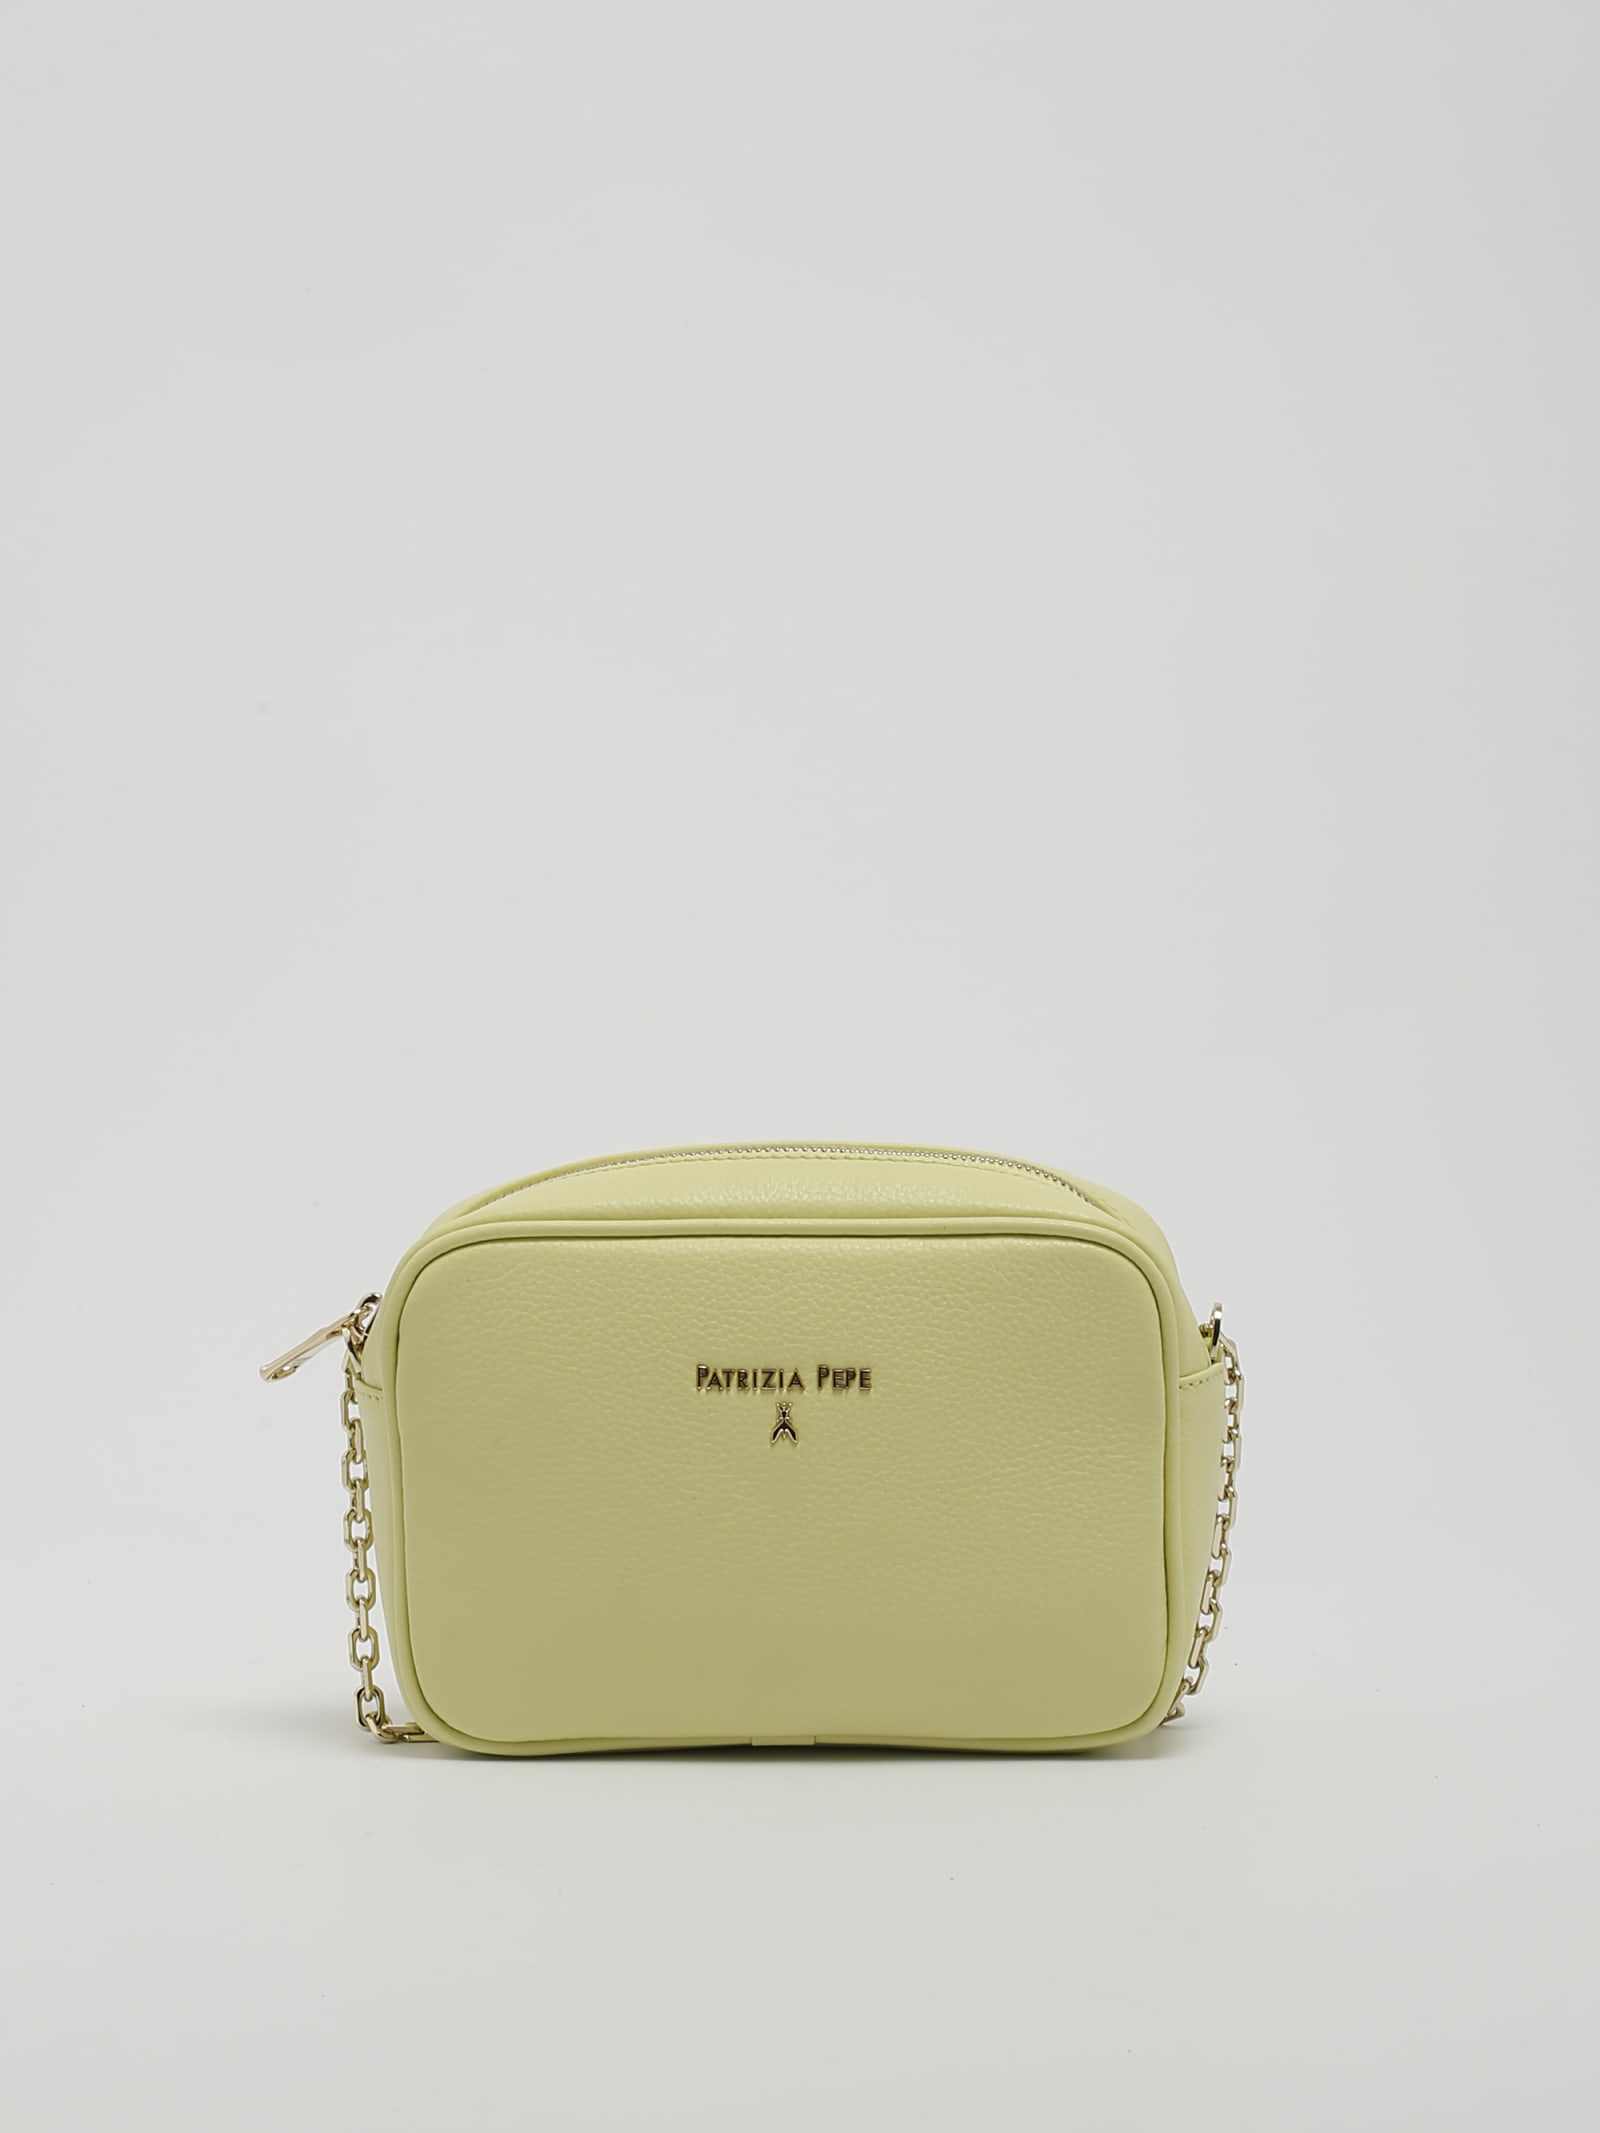 Patrizia Pepe Leather Clutch In Lime